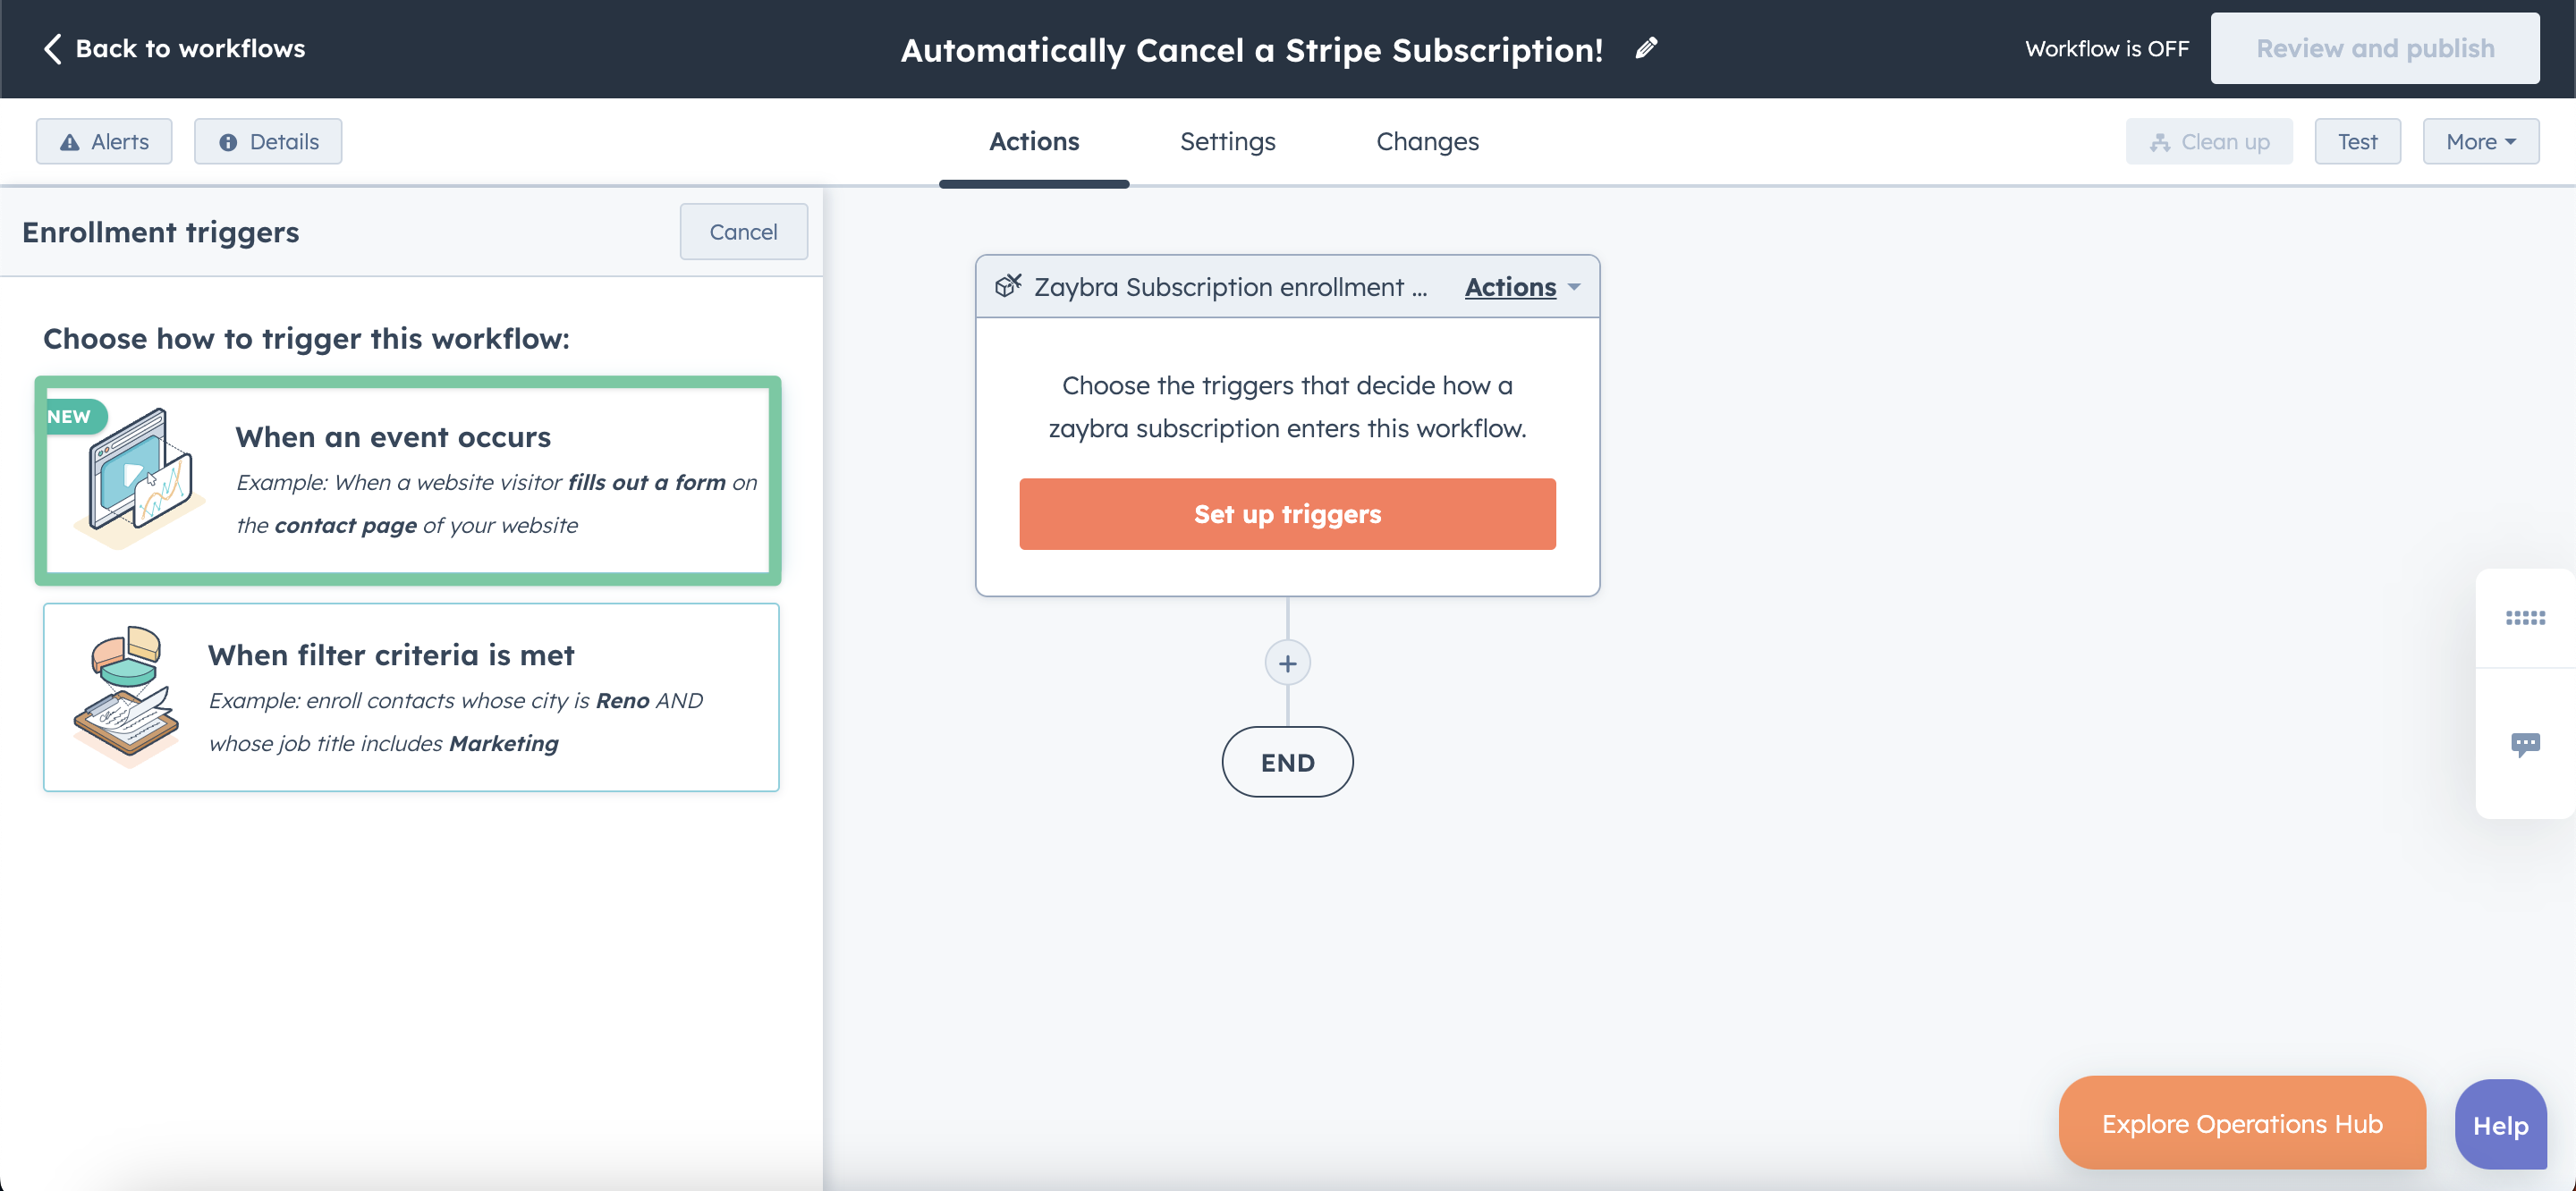 How to automatically cancel a Stripe subscription from HubSpot